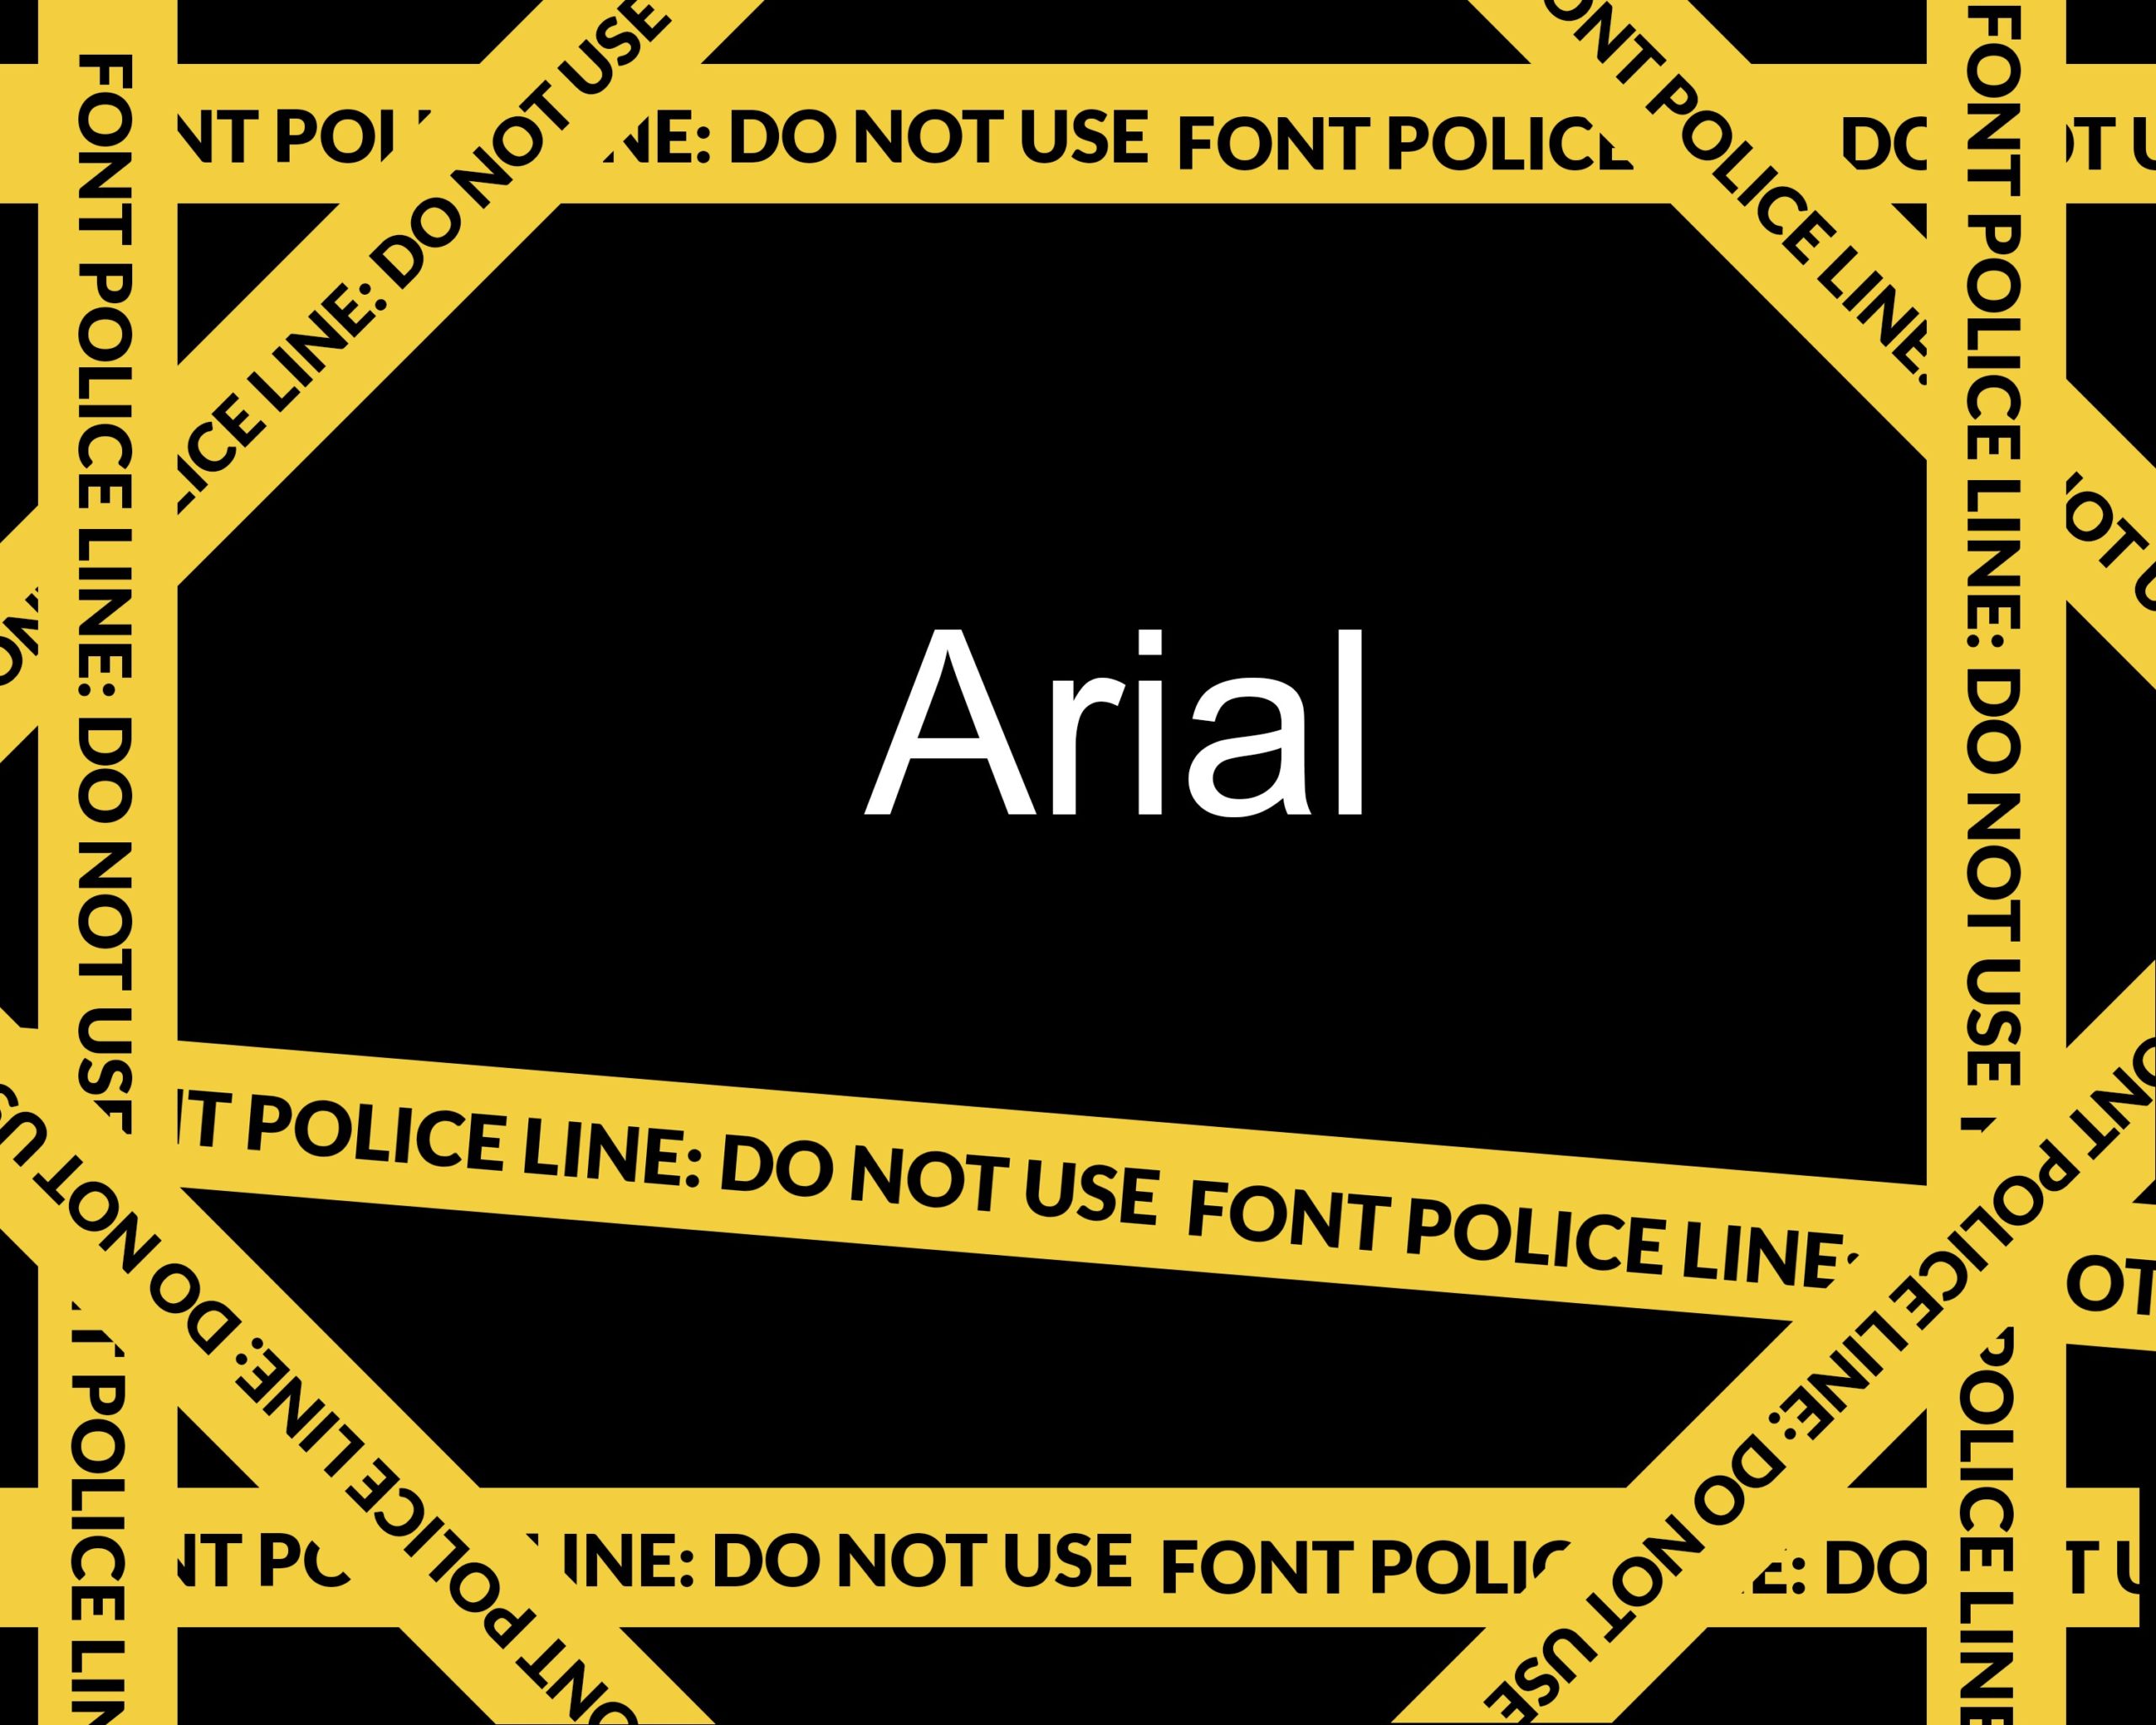 install arial font